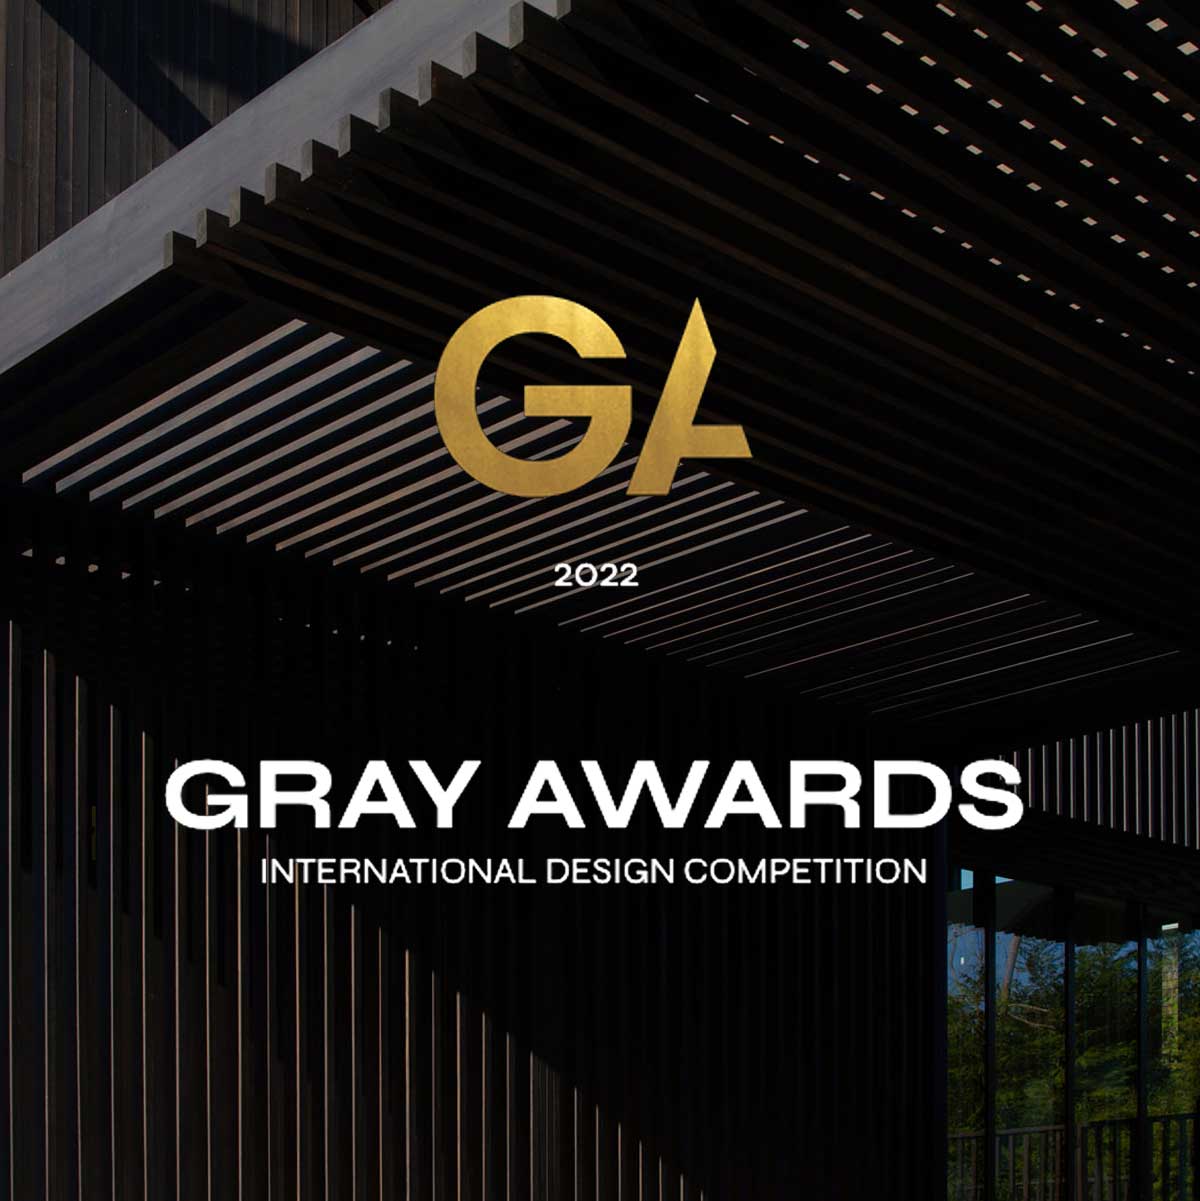 The Up Studio was selected as a residential architecture 2022 Gray Awards Finalist